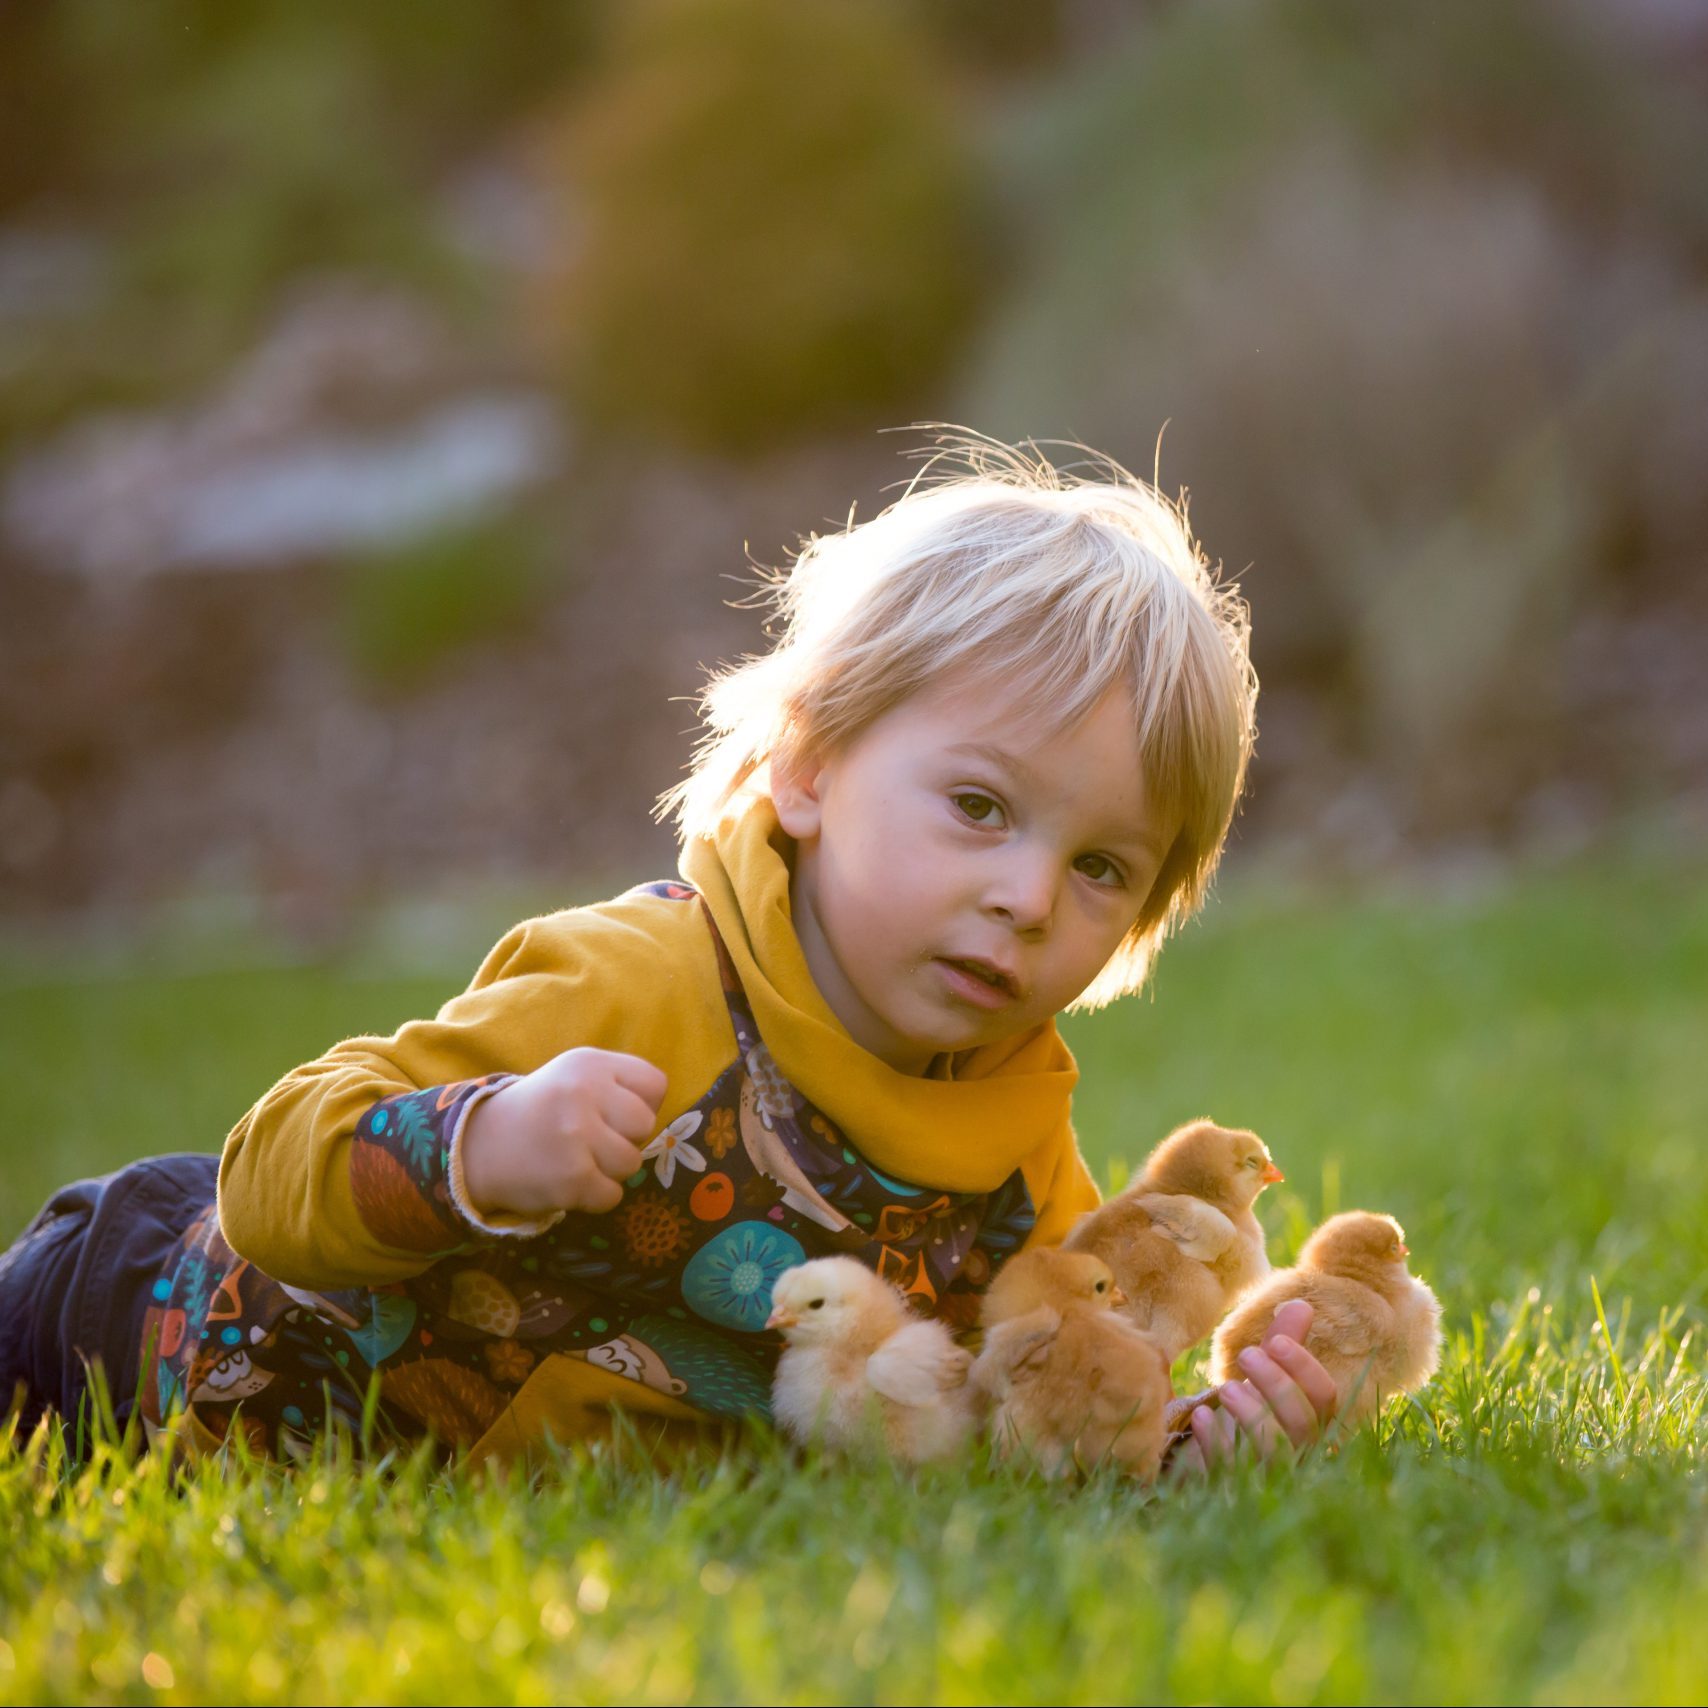 boy in a small backyard with lush green grass